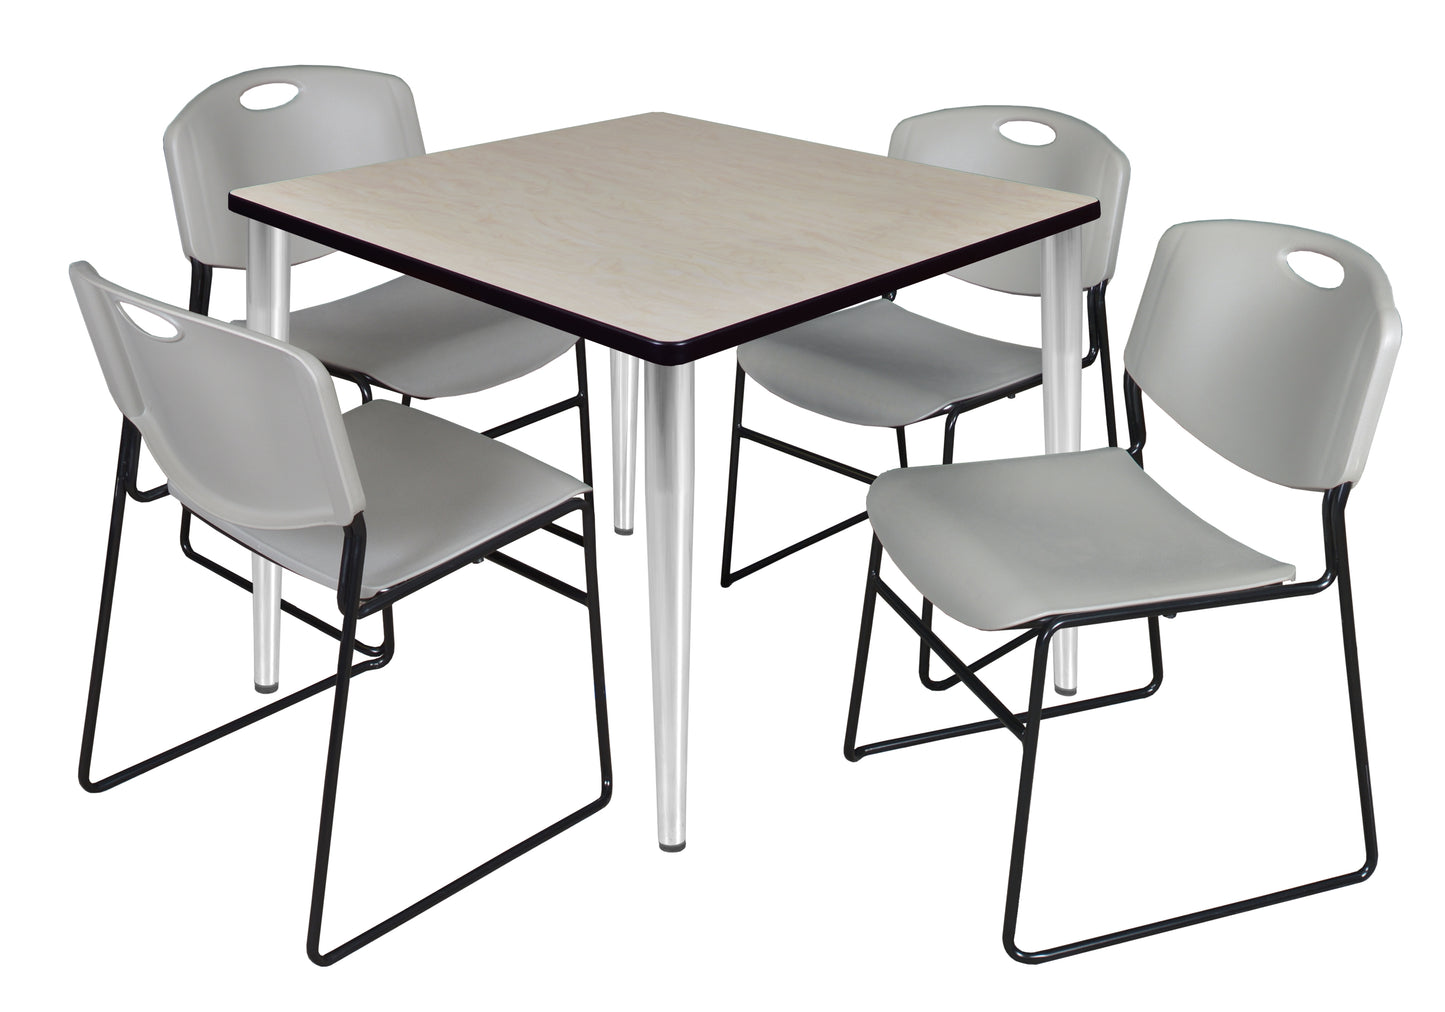 Regency Kahlo 36 in. Square Breakroom Table & 4 Zeng Stack Chairs